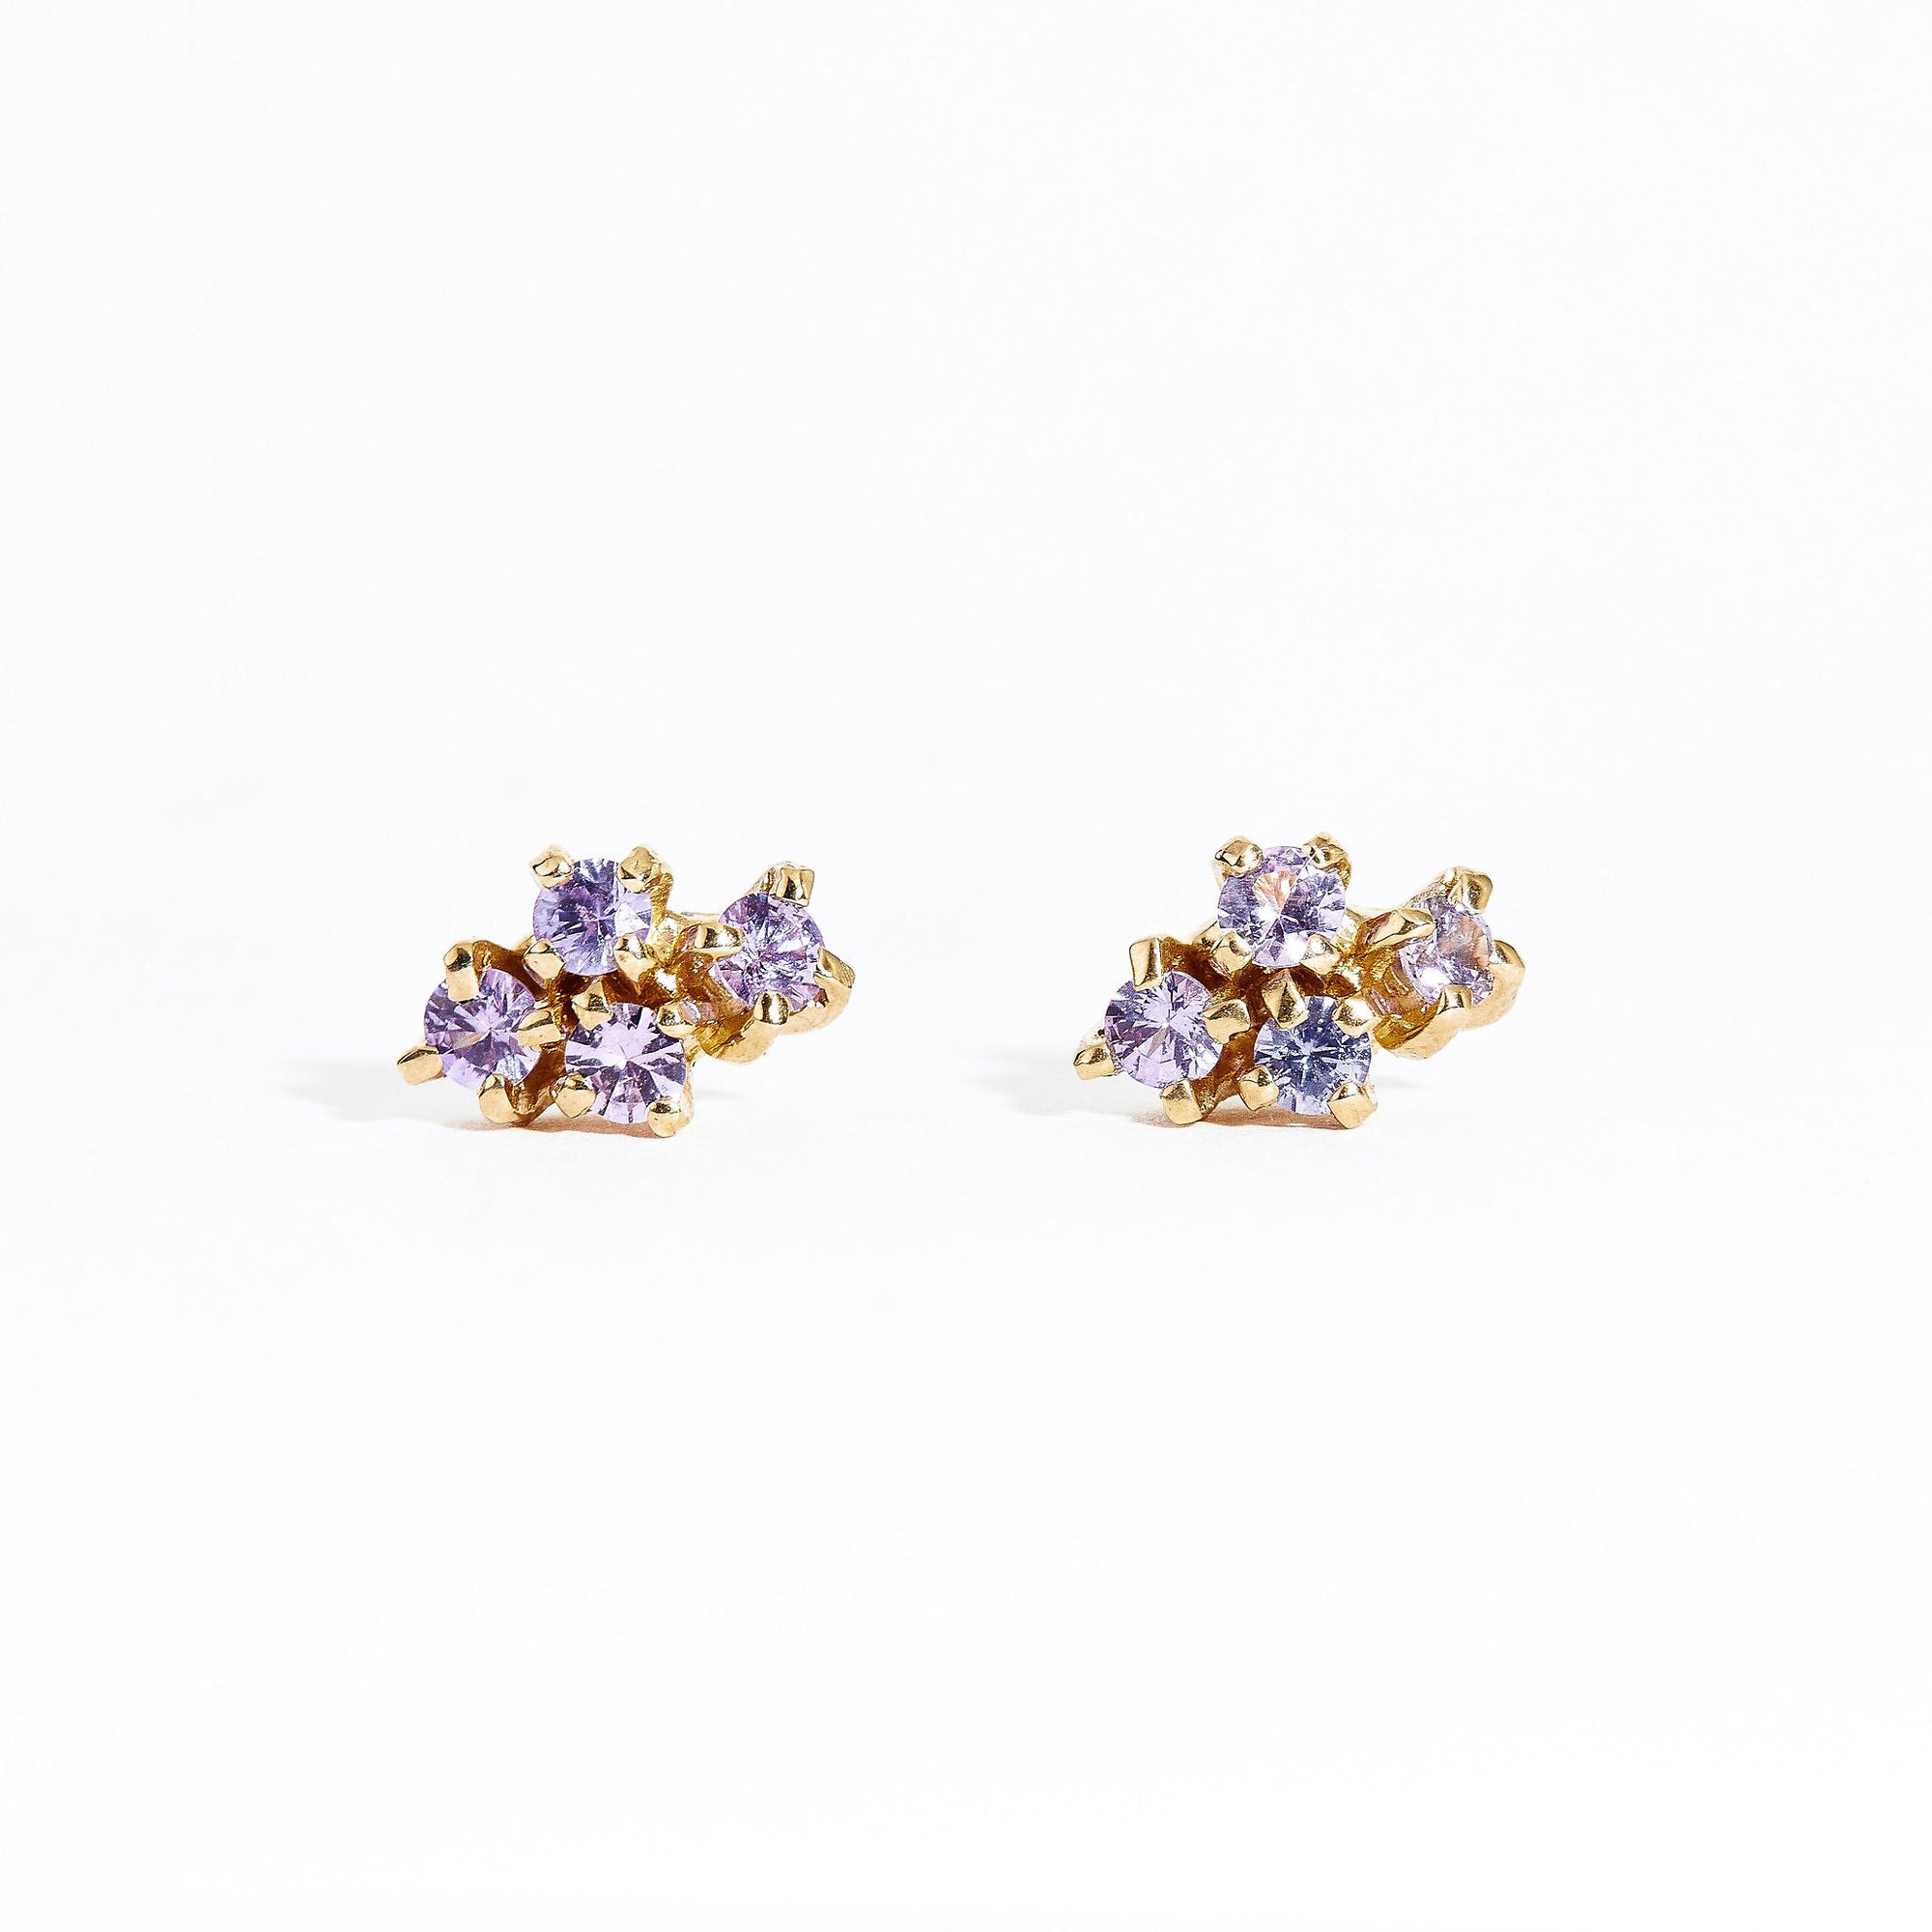  Pair of gold studs featuring four lilac sapphires. Bespoke and handmade in Melbourne by Black Finch Jewellery.